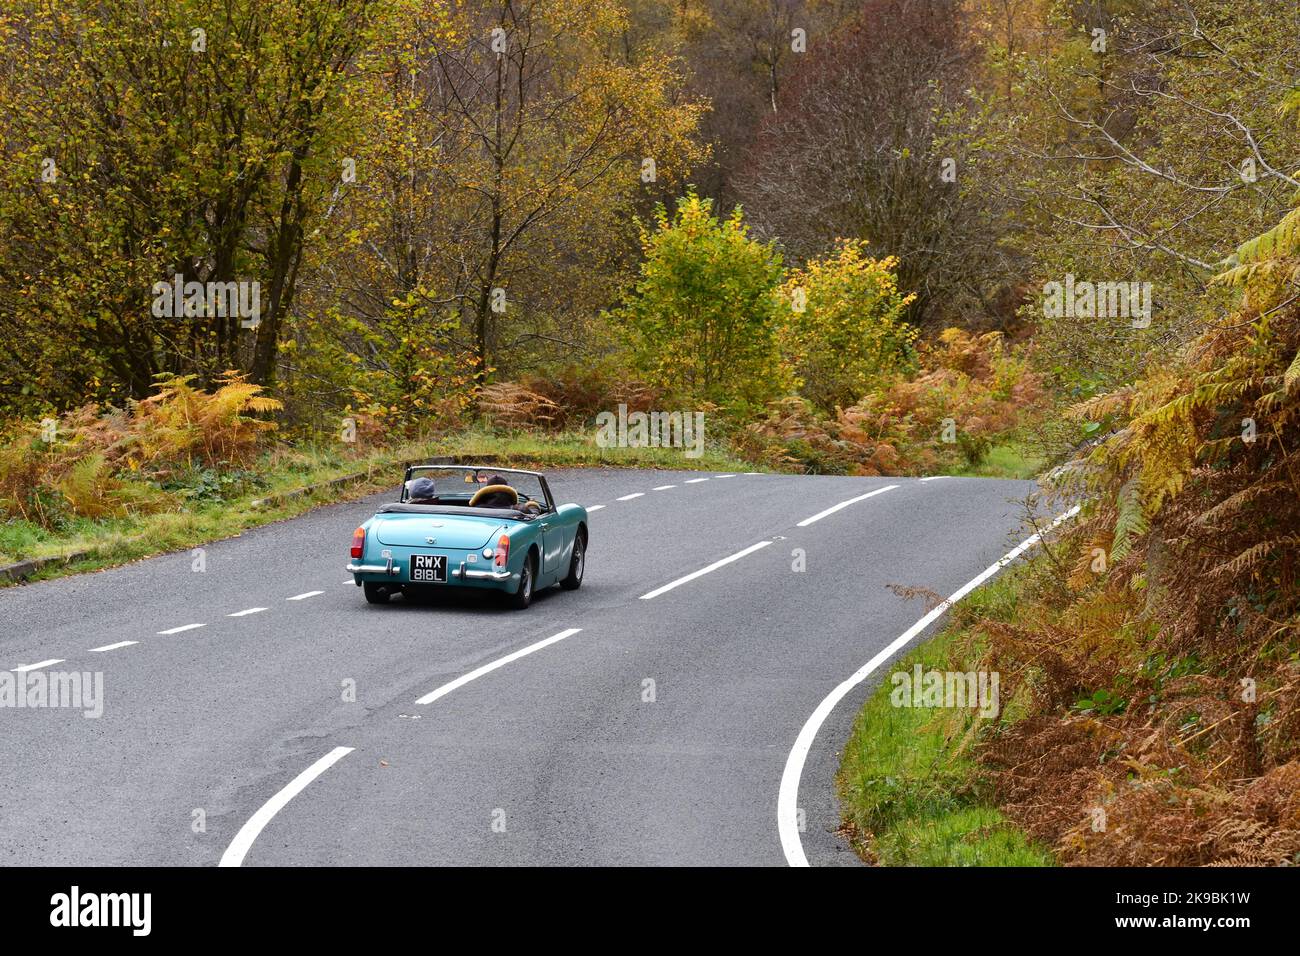 An MG Midget (1973) sports car being driven with the top down during autumn on a country road in Scotland, UK Stock Photo